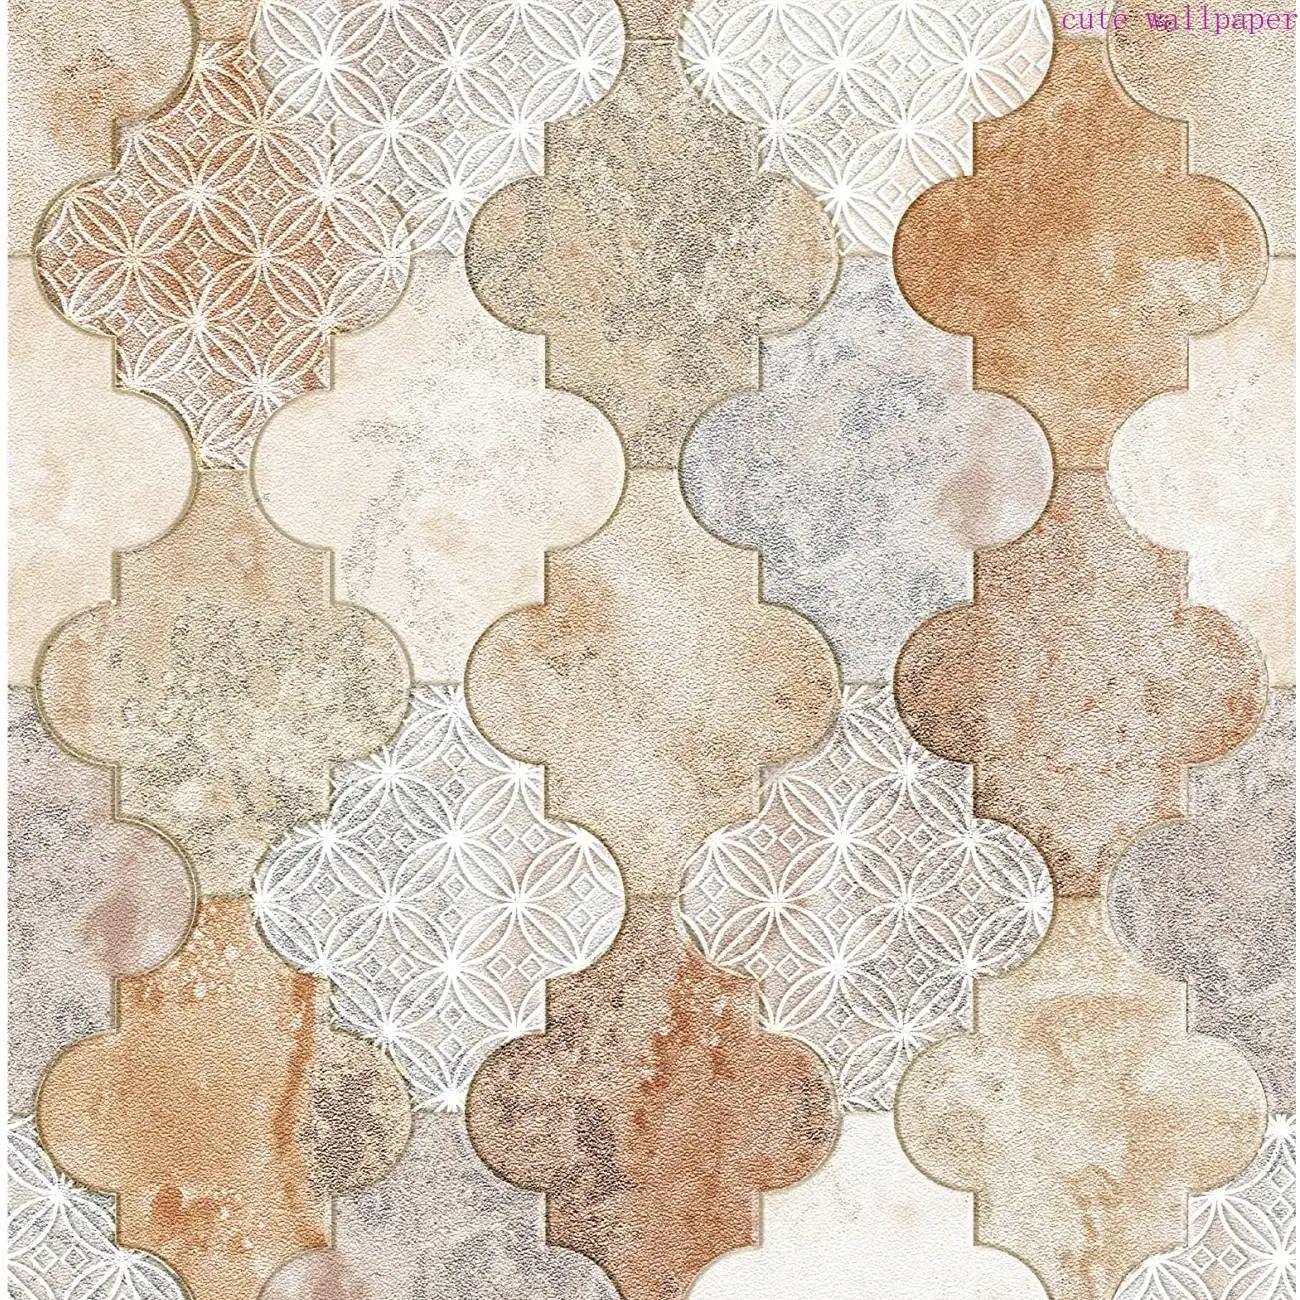 HaoHome Peel and Stick Wallpaper Handpainting Trellis Marble Stone Extra Thick Self-Adhesive Prepasted Wallpaper Wall Mural vintage brown brick wallpaper brick self adhesive film brick peel and stick wallpaper faux brick textured wallpaper stone paper